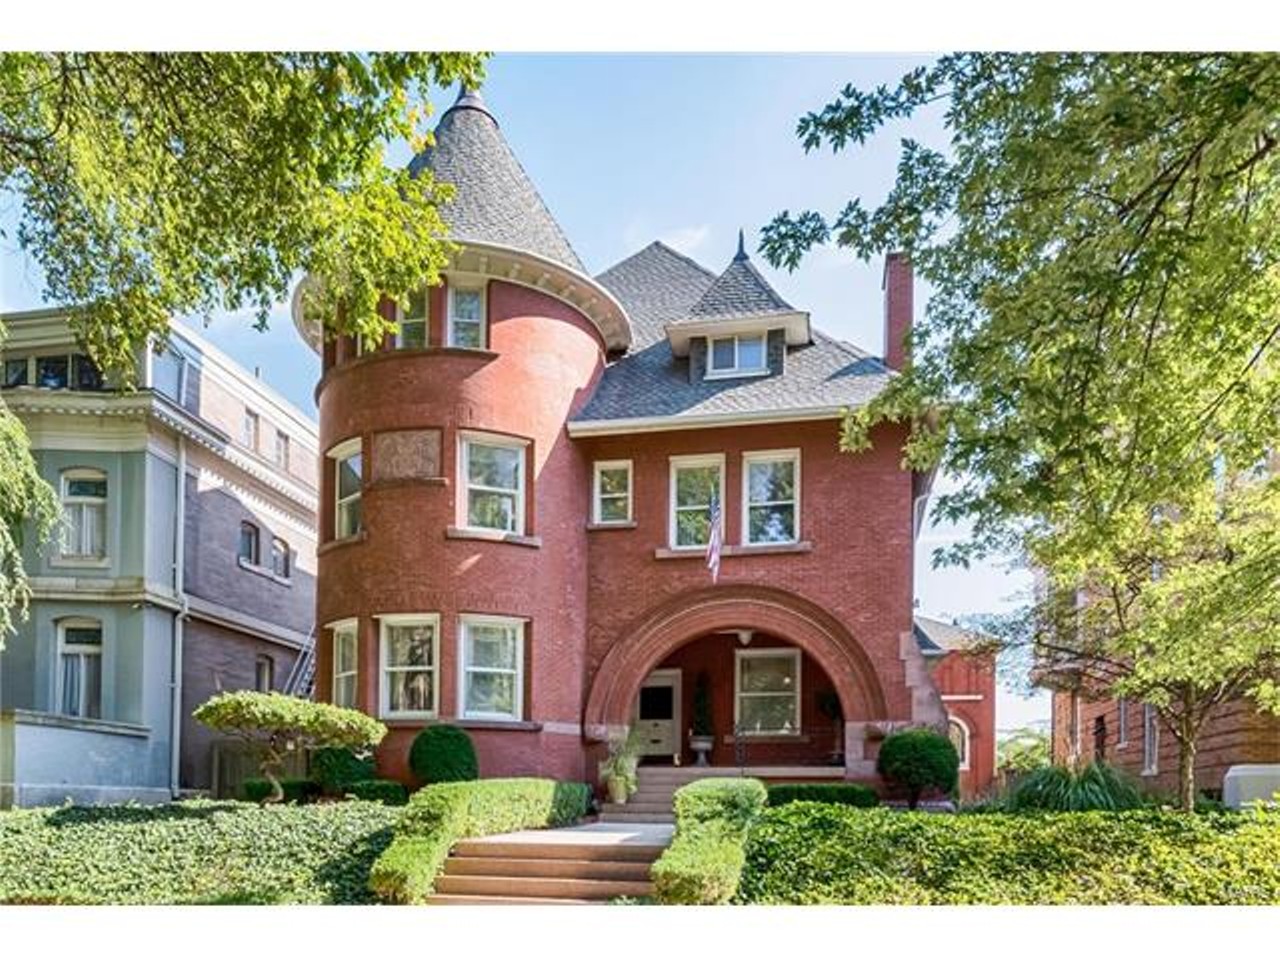 4411 Westminster Place
St Louis, MO 63108
$1,195,000
5 beds, 5 baths, 8,590 sqft
This house may not scream "grandeur" on the outside like some of the others, but just you wait. Inside, this home is a ornate as can be, with highlights including a grand staircase, a living room with a fancy fireplace and a curved wall of windows, and a music room-turned-great room. And the back patio? Don't even get us started.